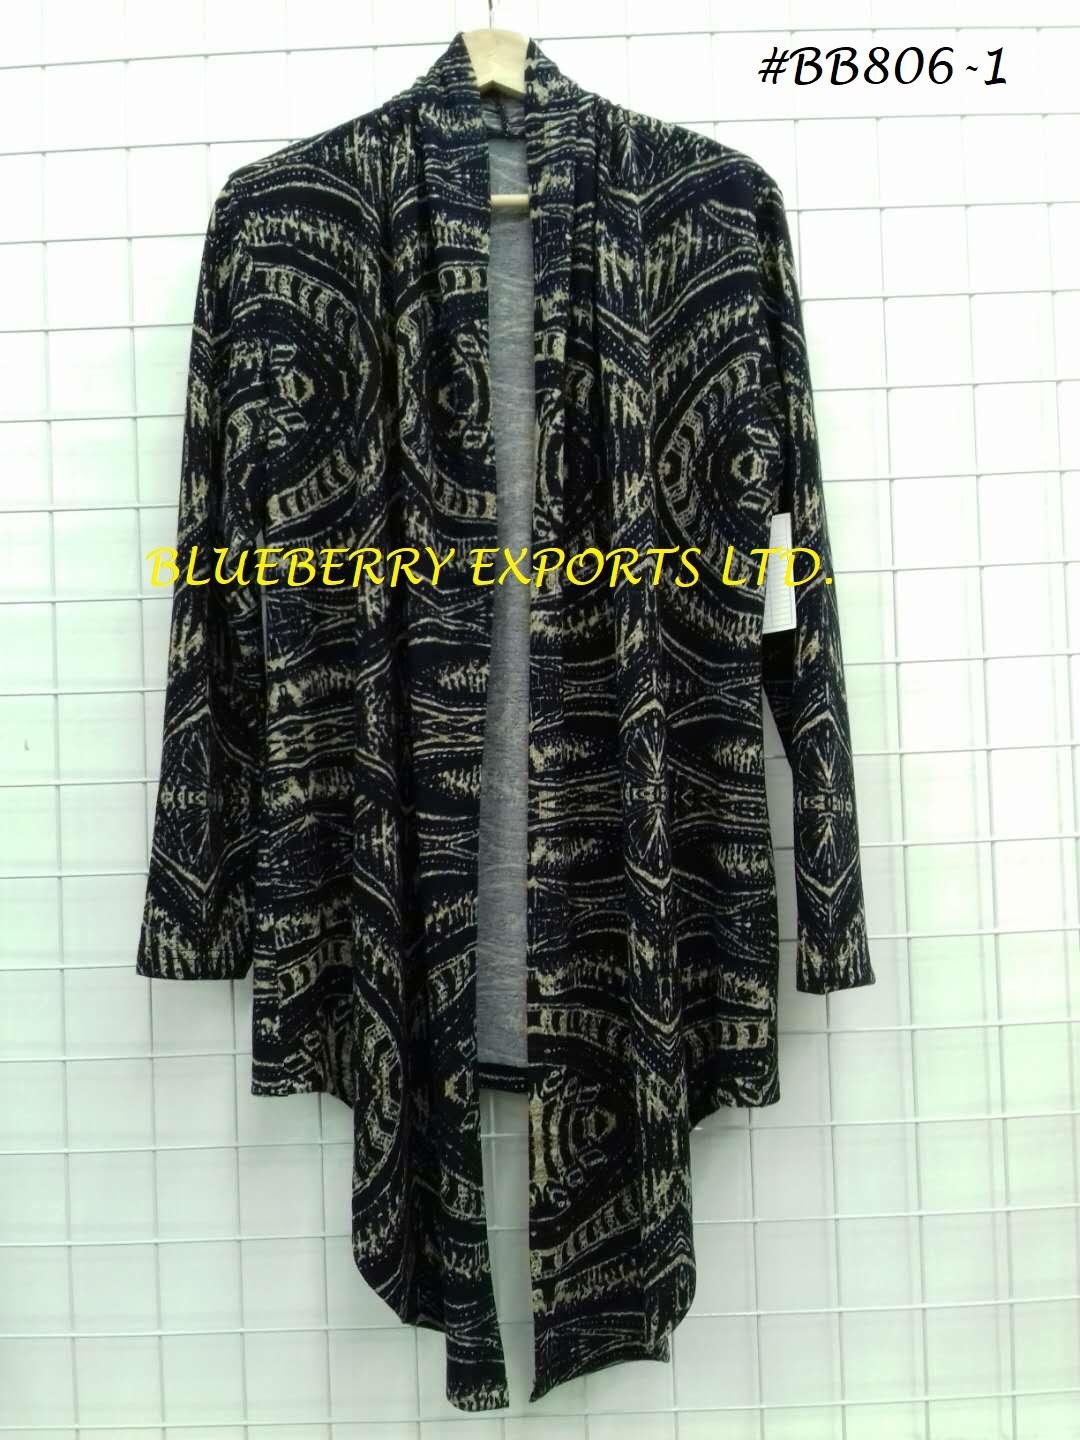 Knit short cardigan with pattern design #BB806-1